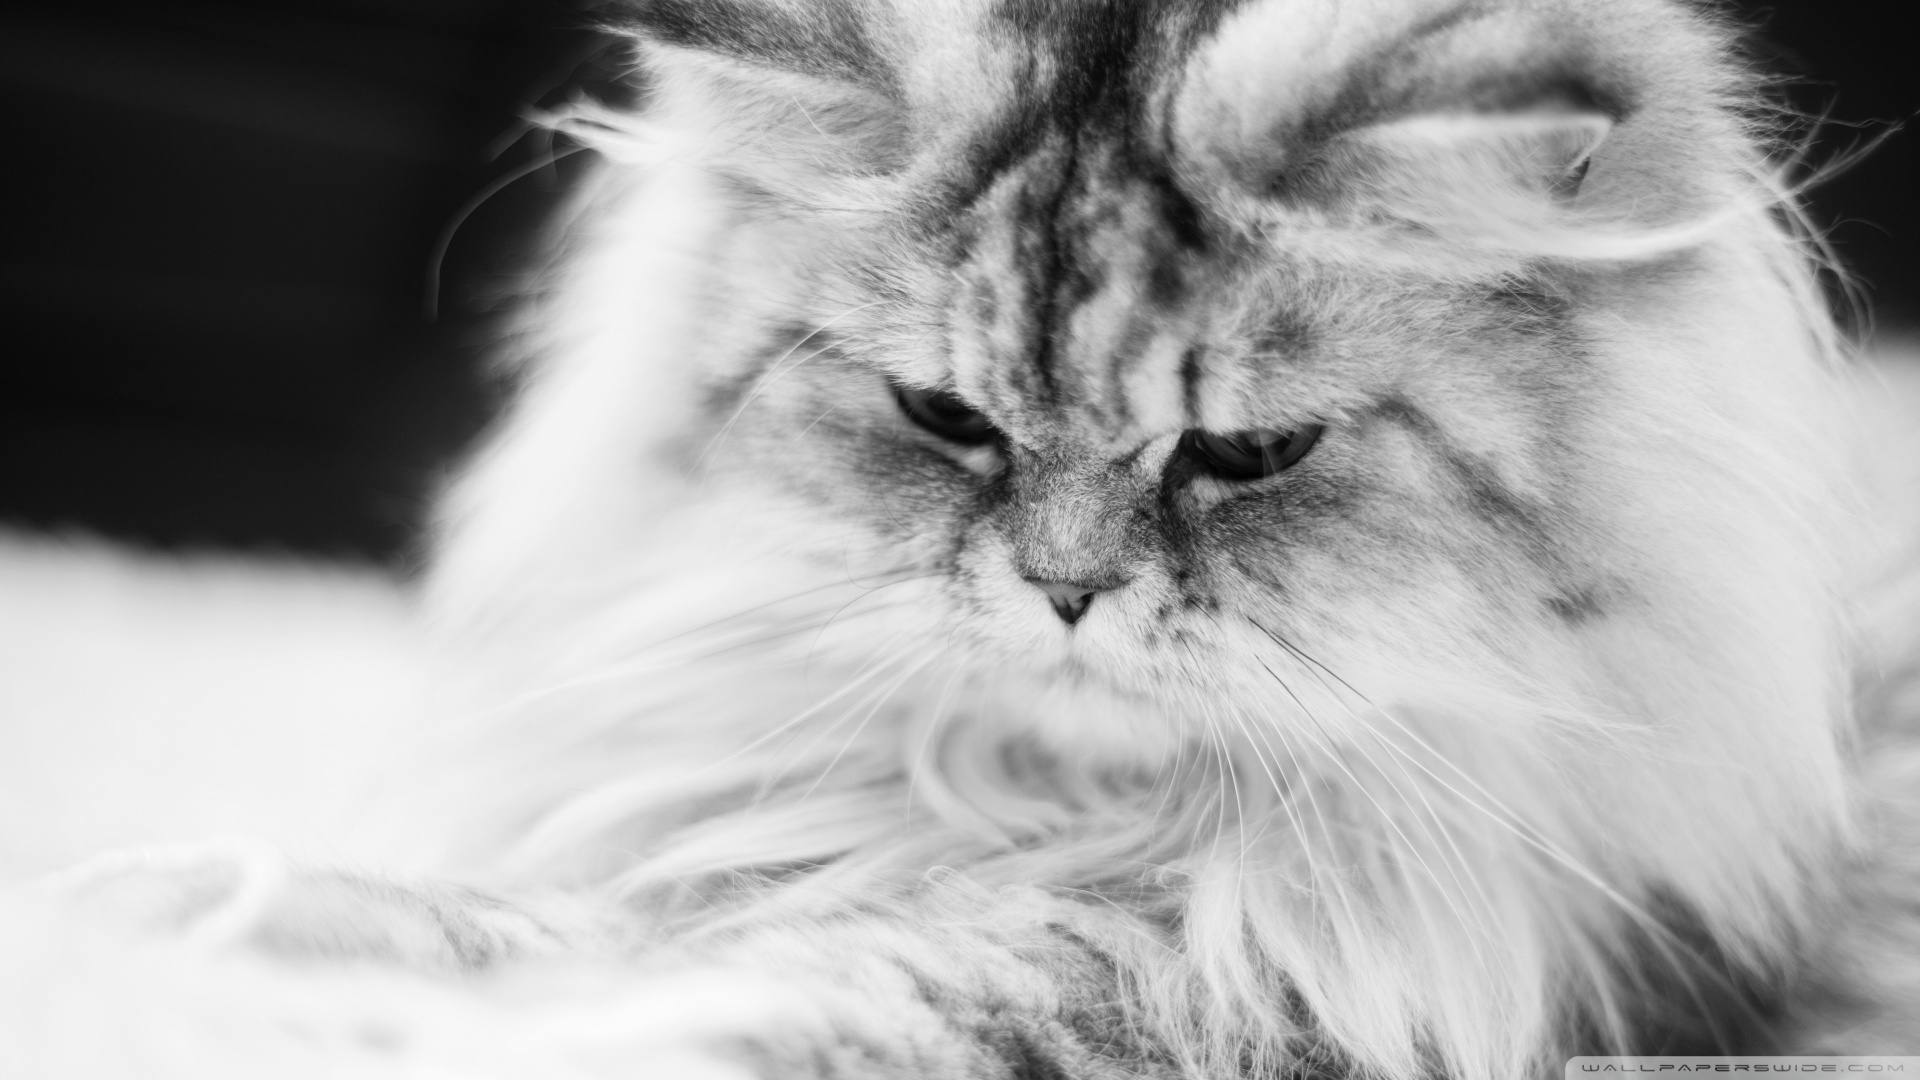 wallpaperswide.com_cute_fluffy_cat_black_and_white-wallpaper-1920x1080.jpg